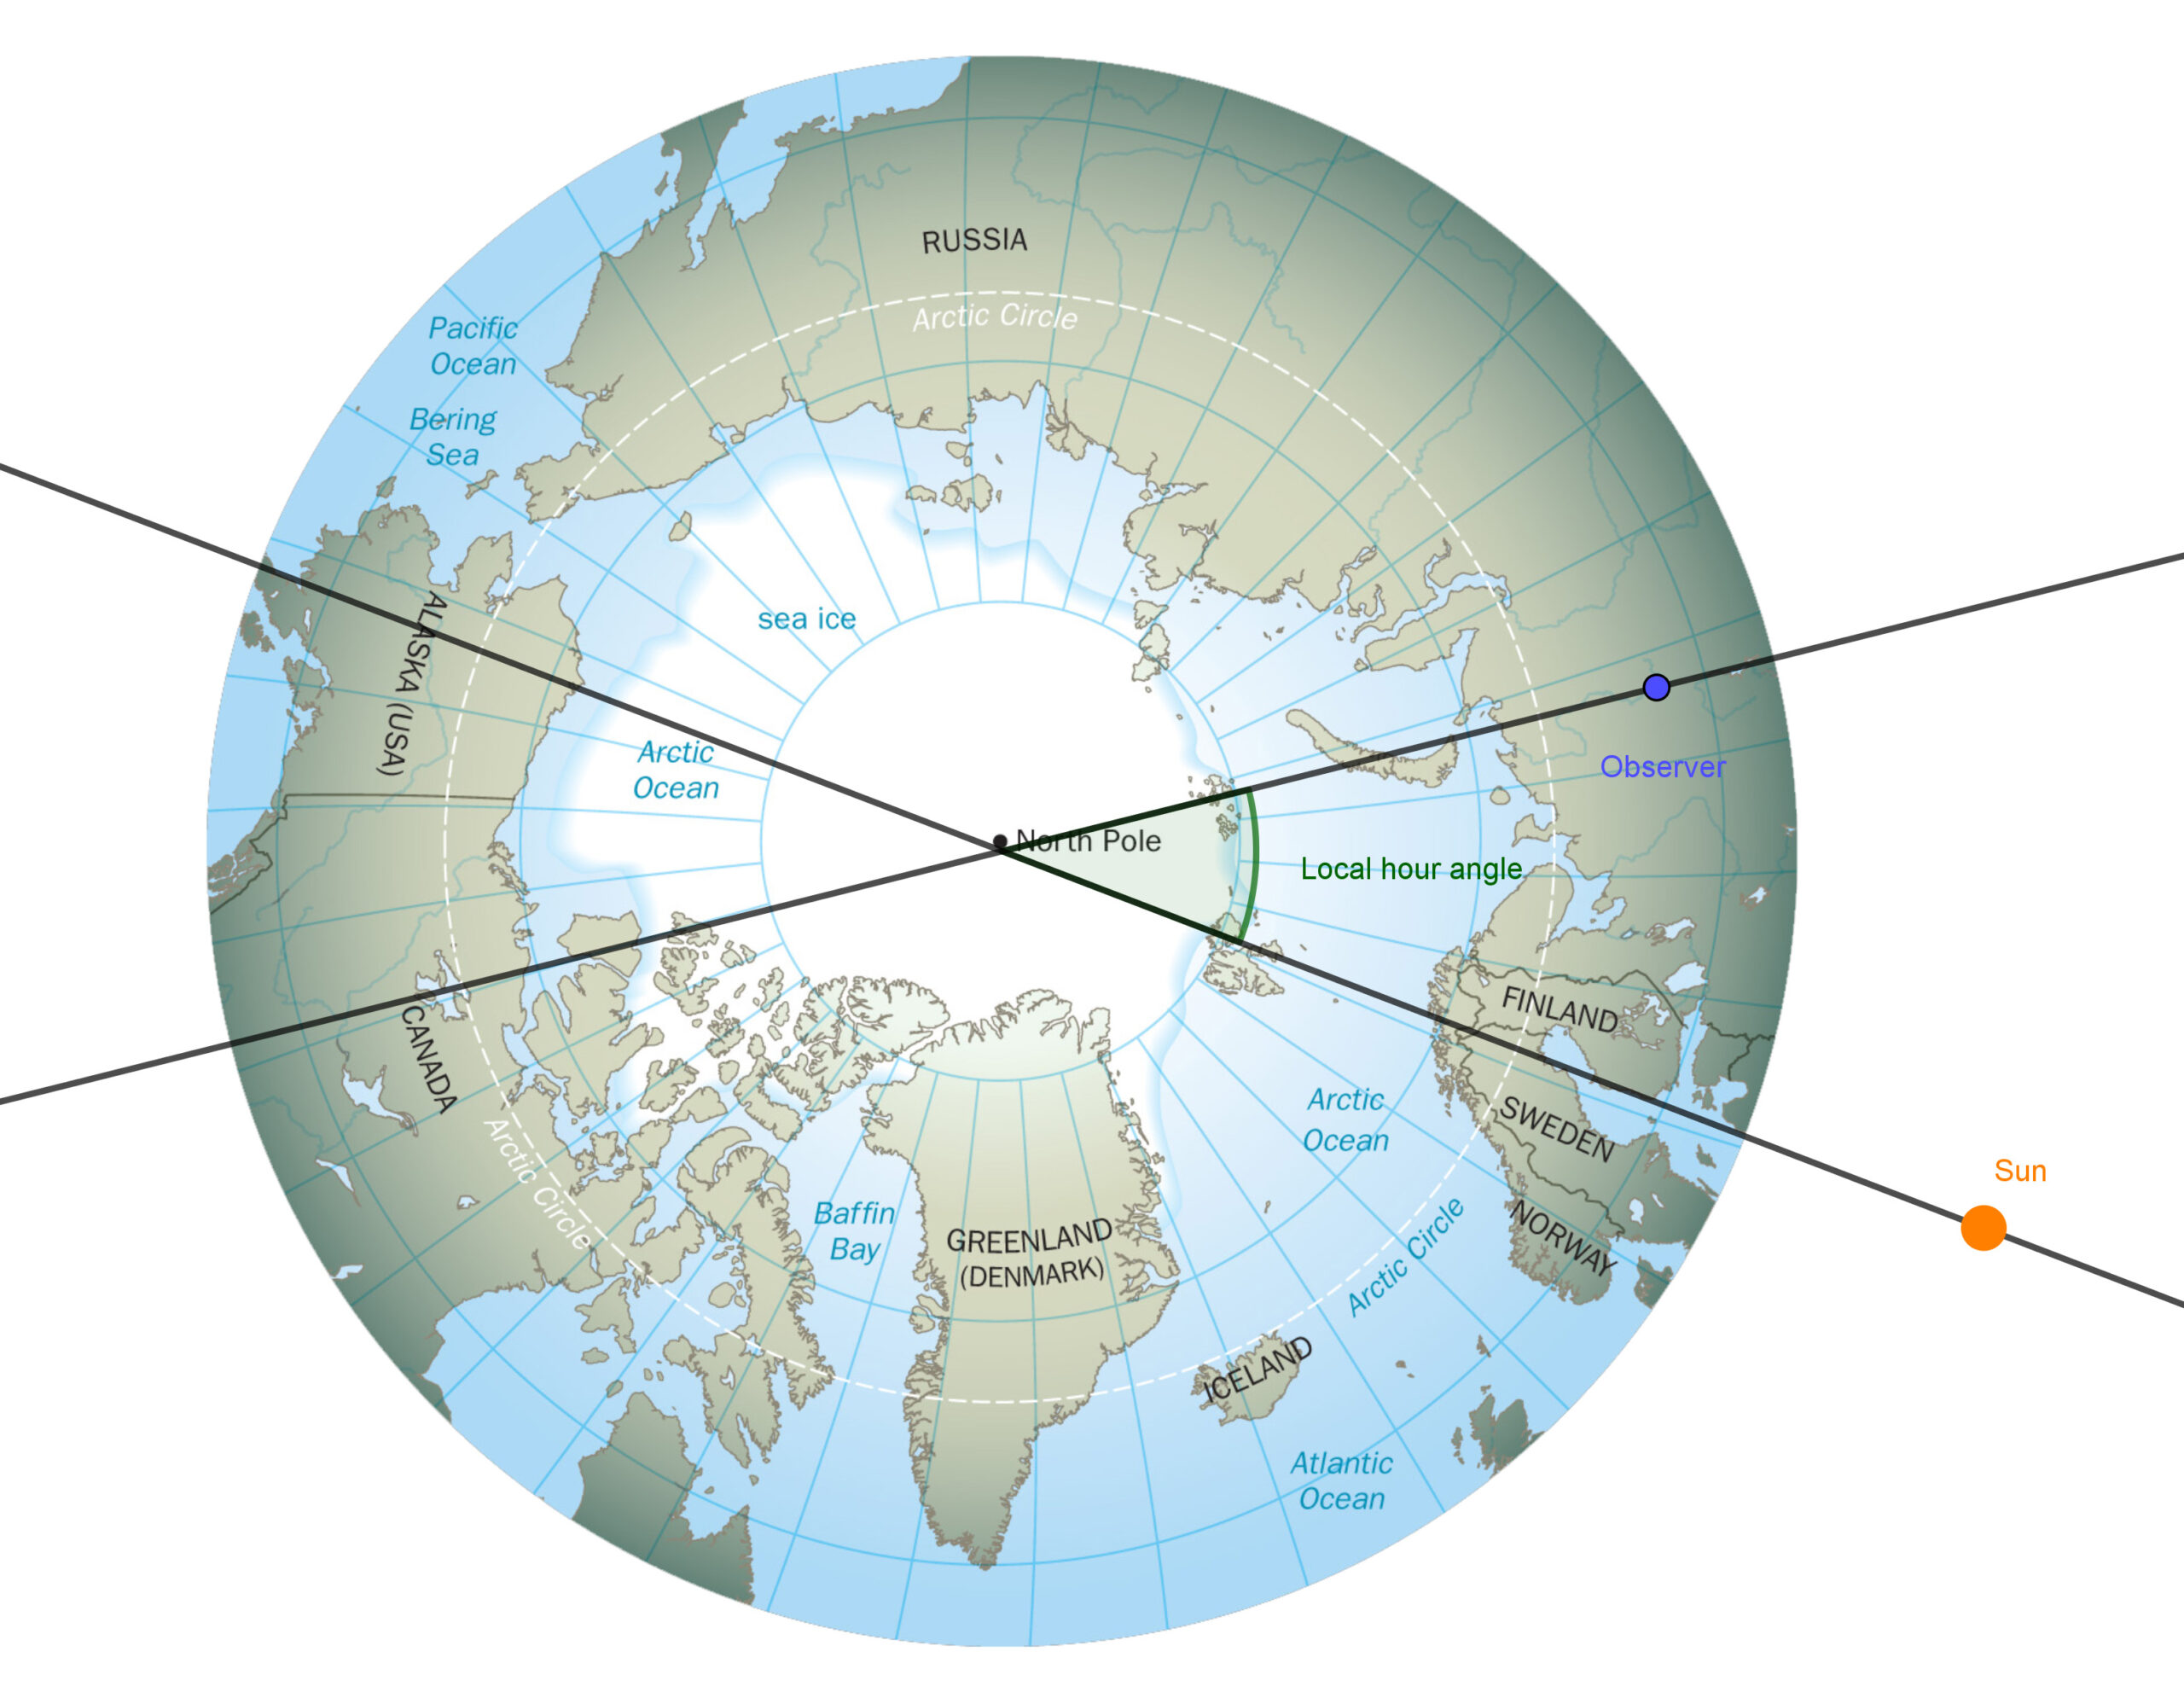 View of the earth from the North Pole. The location of an observer is drawn as a point with a line going from the North Pole to the observer (the observer's local meridian). The location of the sun is depicted as well, with another line going from the North Pole to the sun (the sun's meridian). The current time is depicted as the angle between the observer's meridian and the sun's meridian (the so-called local hour angle).